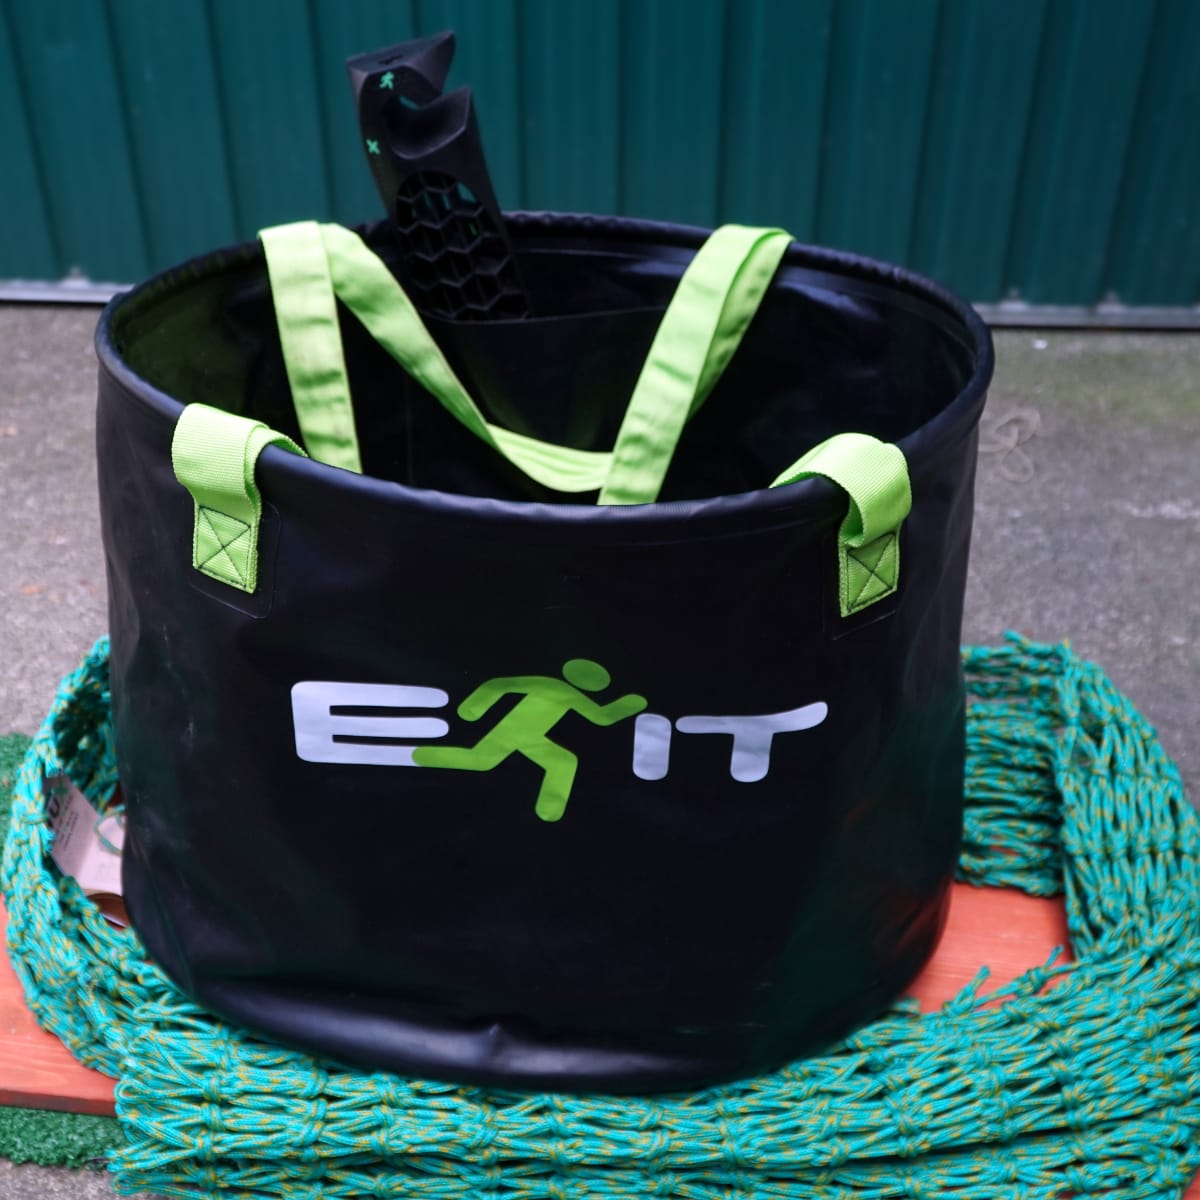 BUX wetsuit Change Bucket - better than changing mat or wet bag